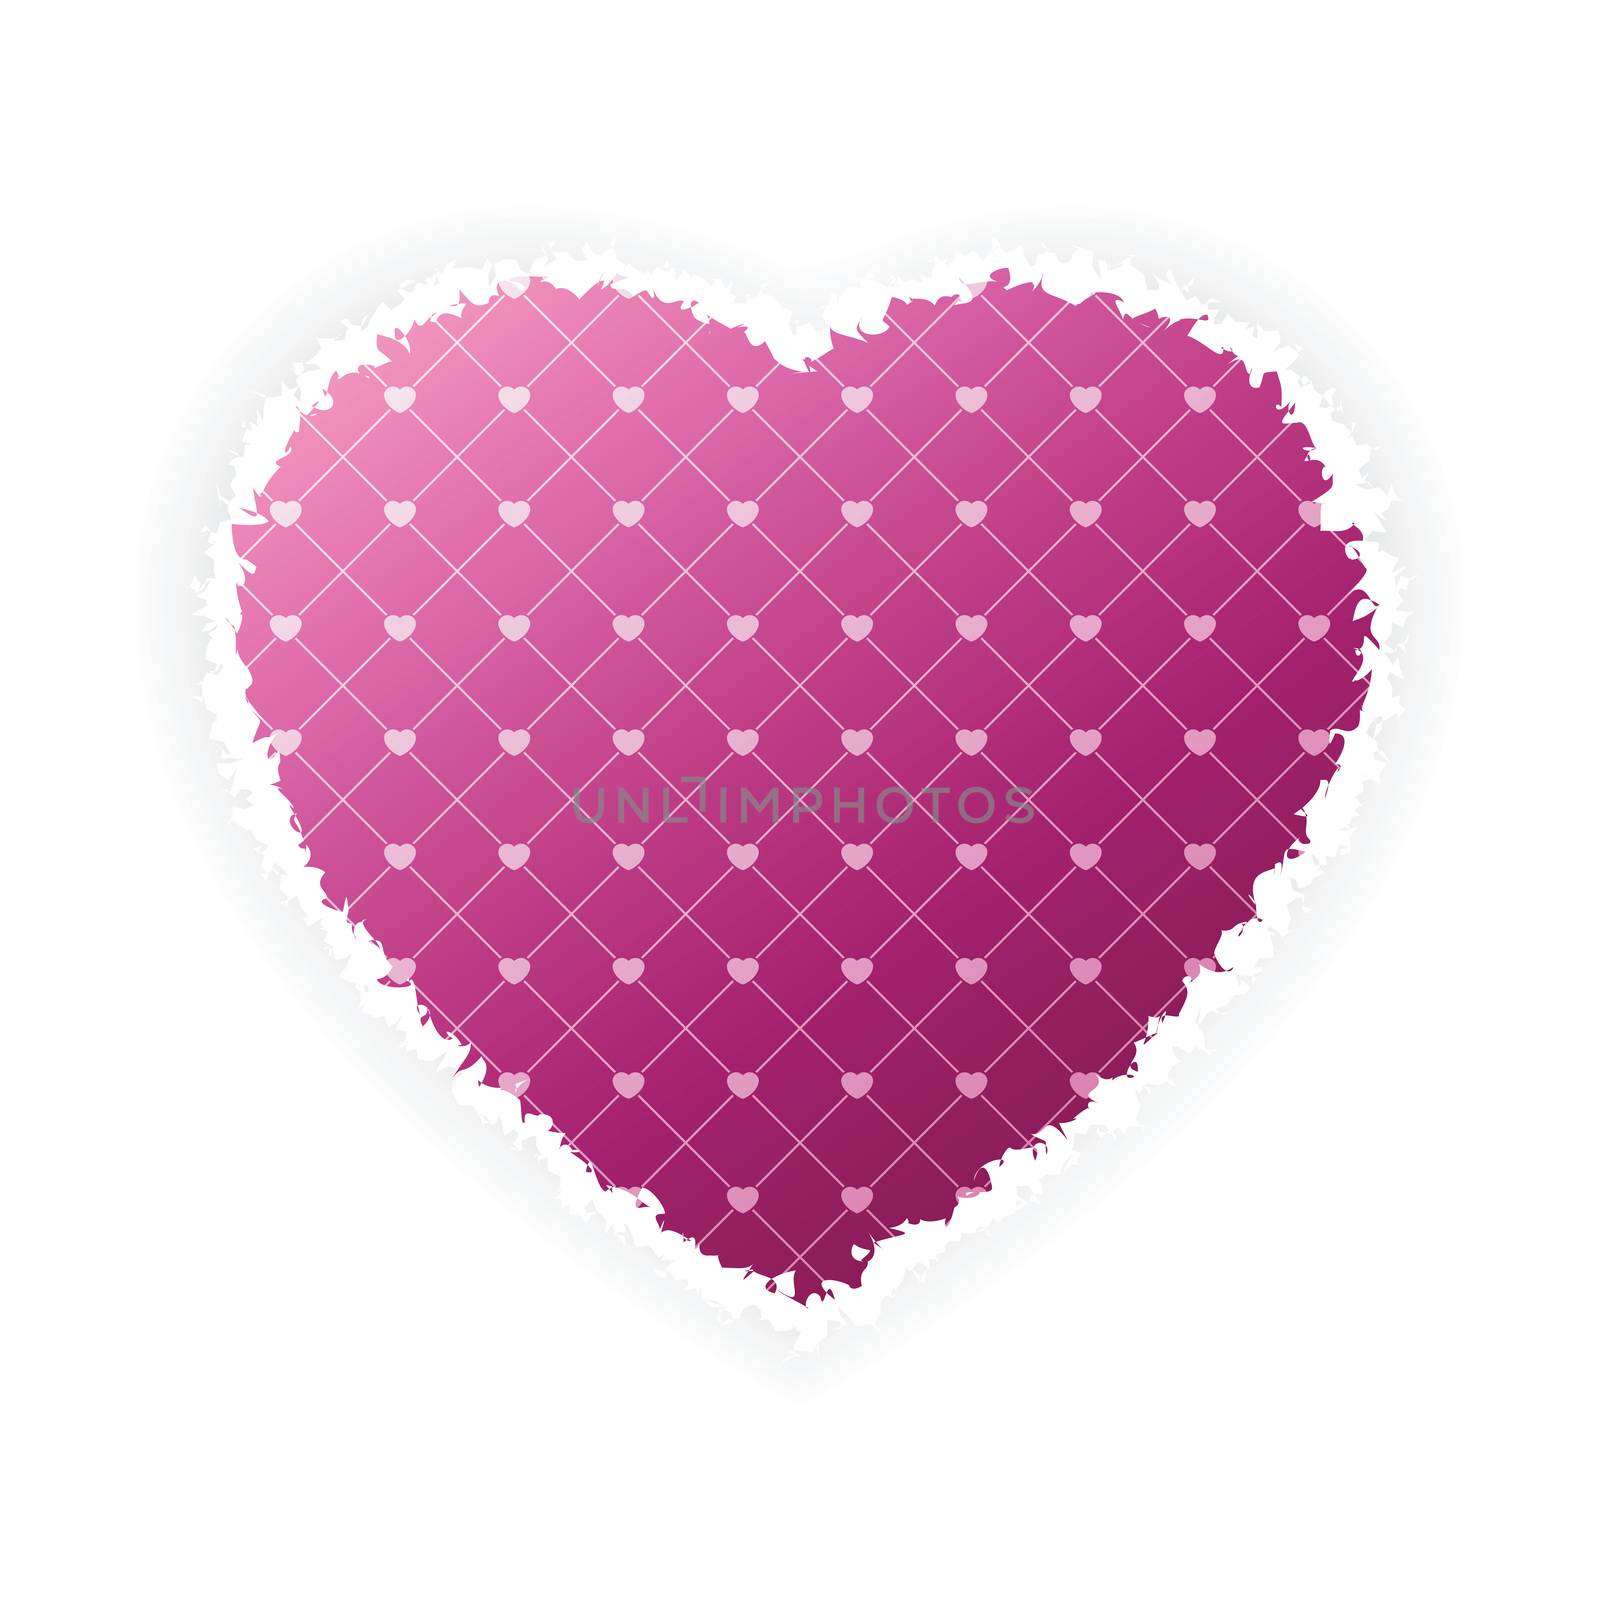 Torn Valentine's Day heart for Your desing